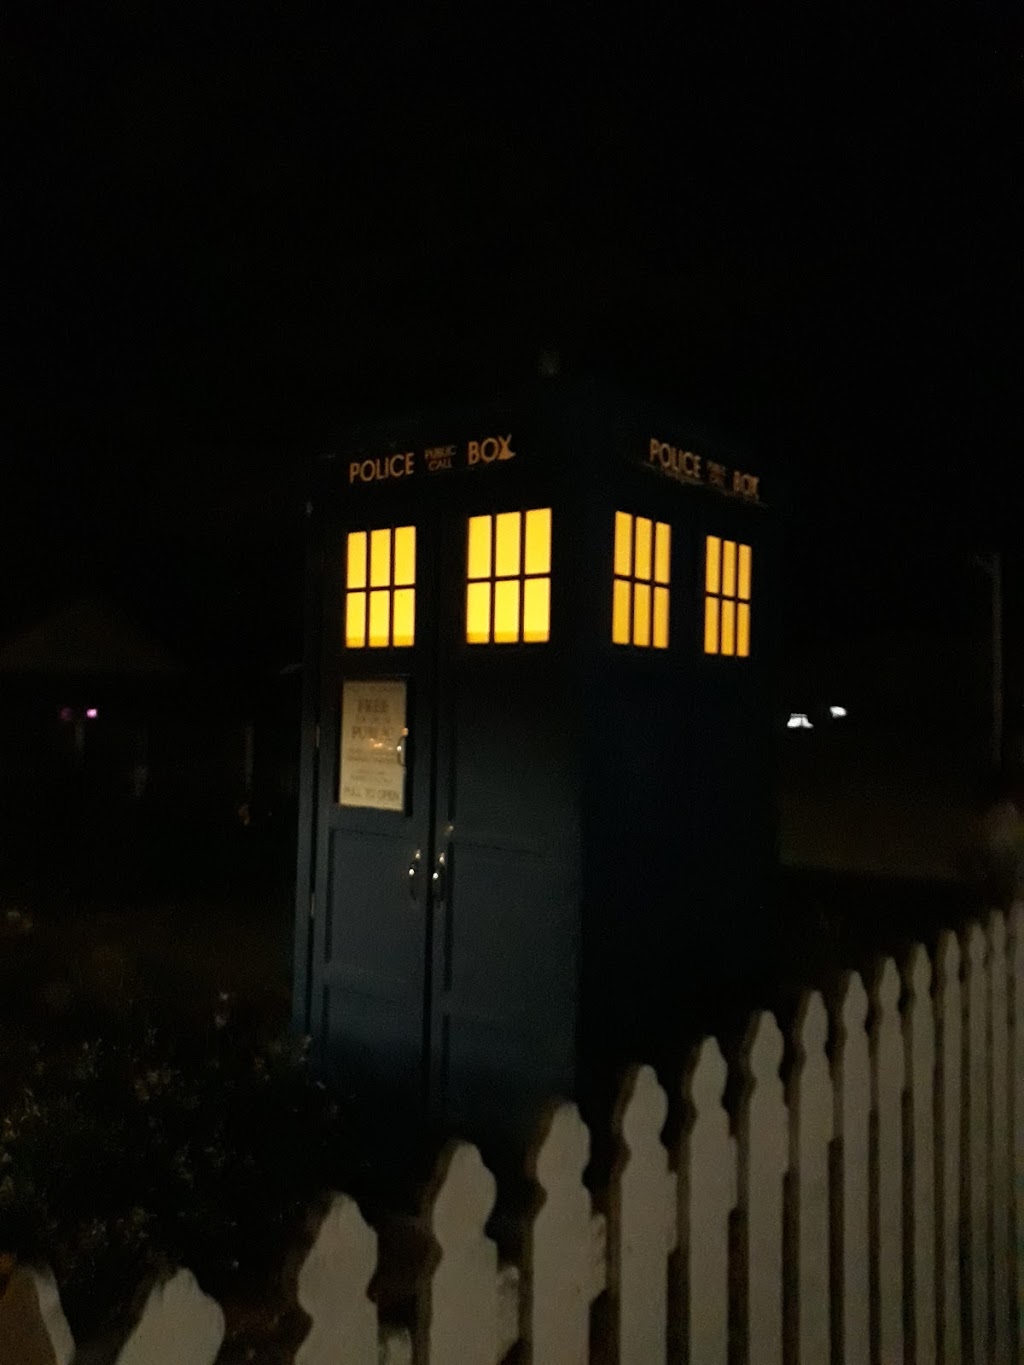 Doctor Who Tardis In Town | museum | Hall ACT 2618, Australia